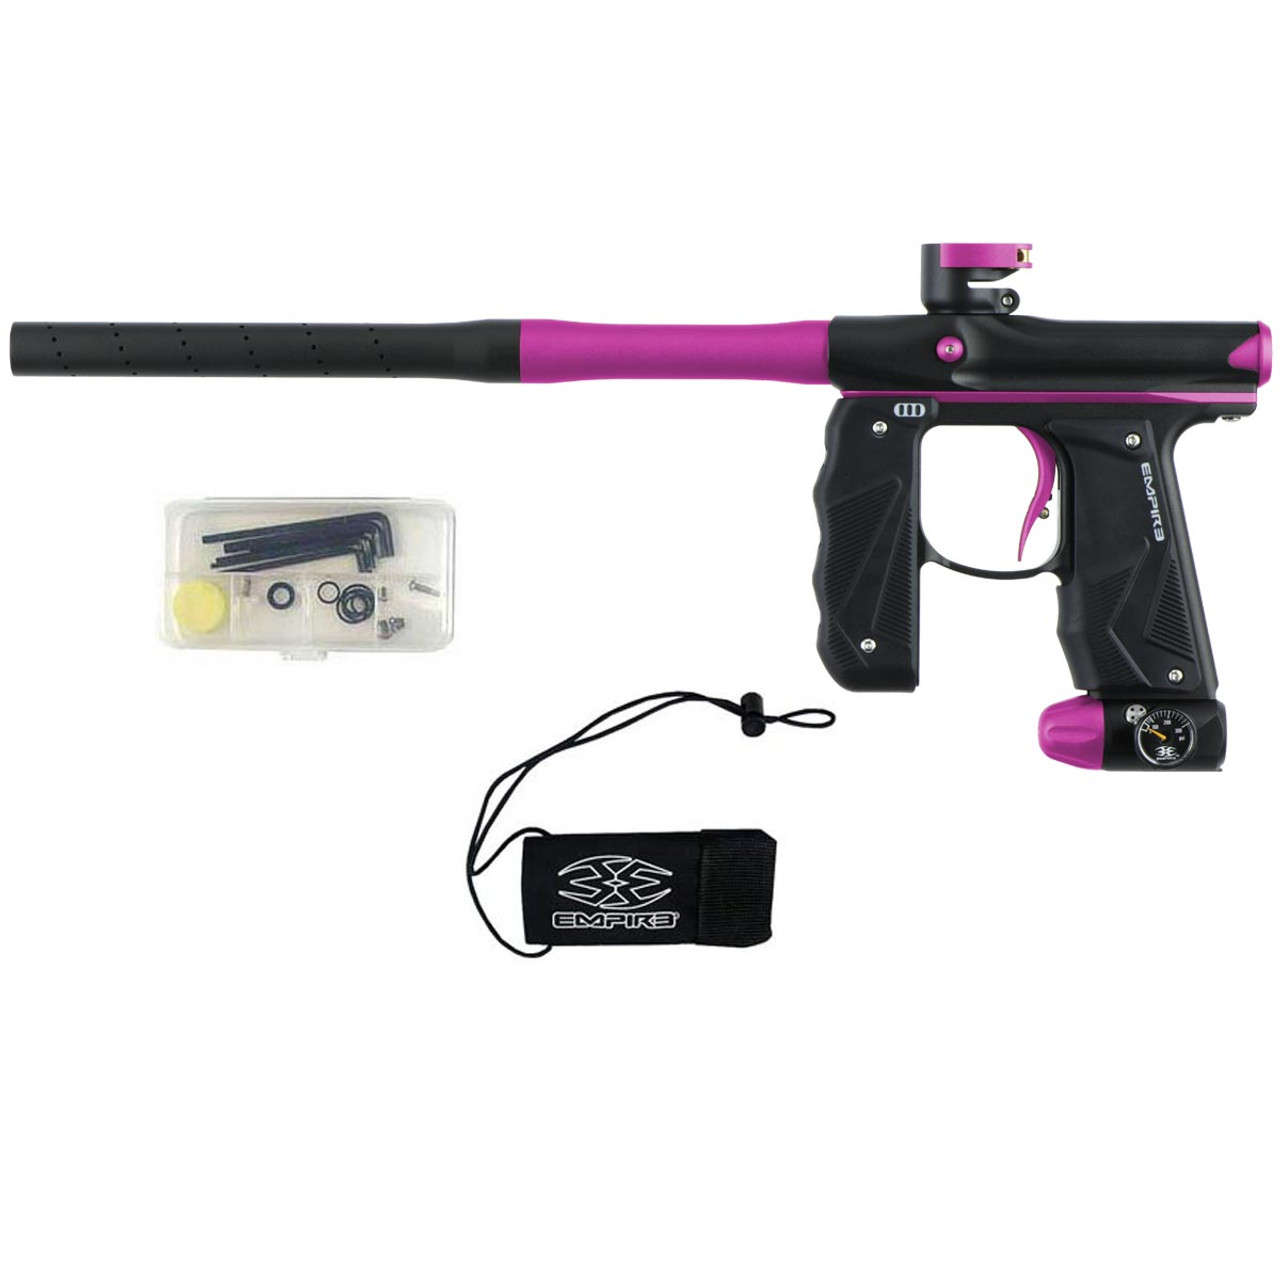 How to Choose the Right Paintball Gun: Guide & Marker Overview